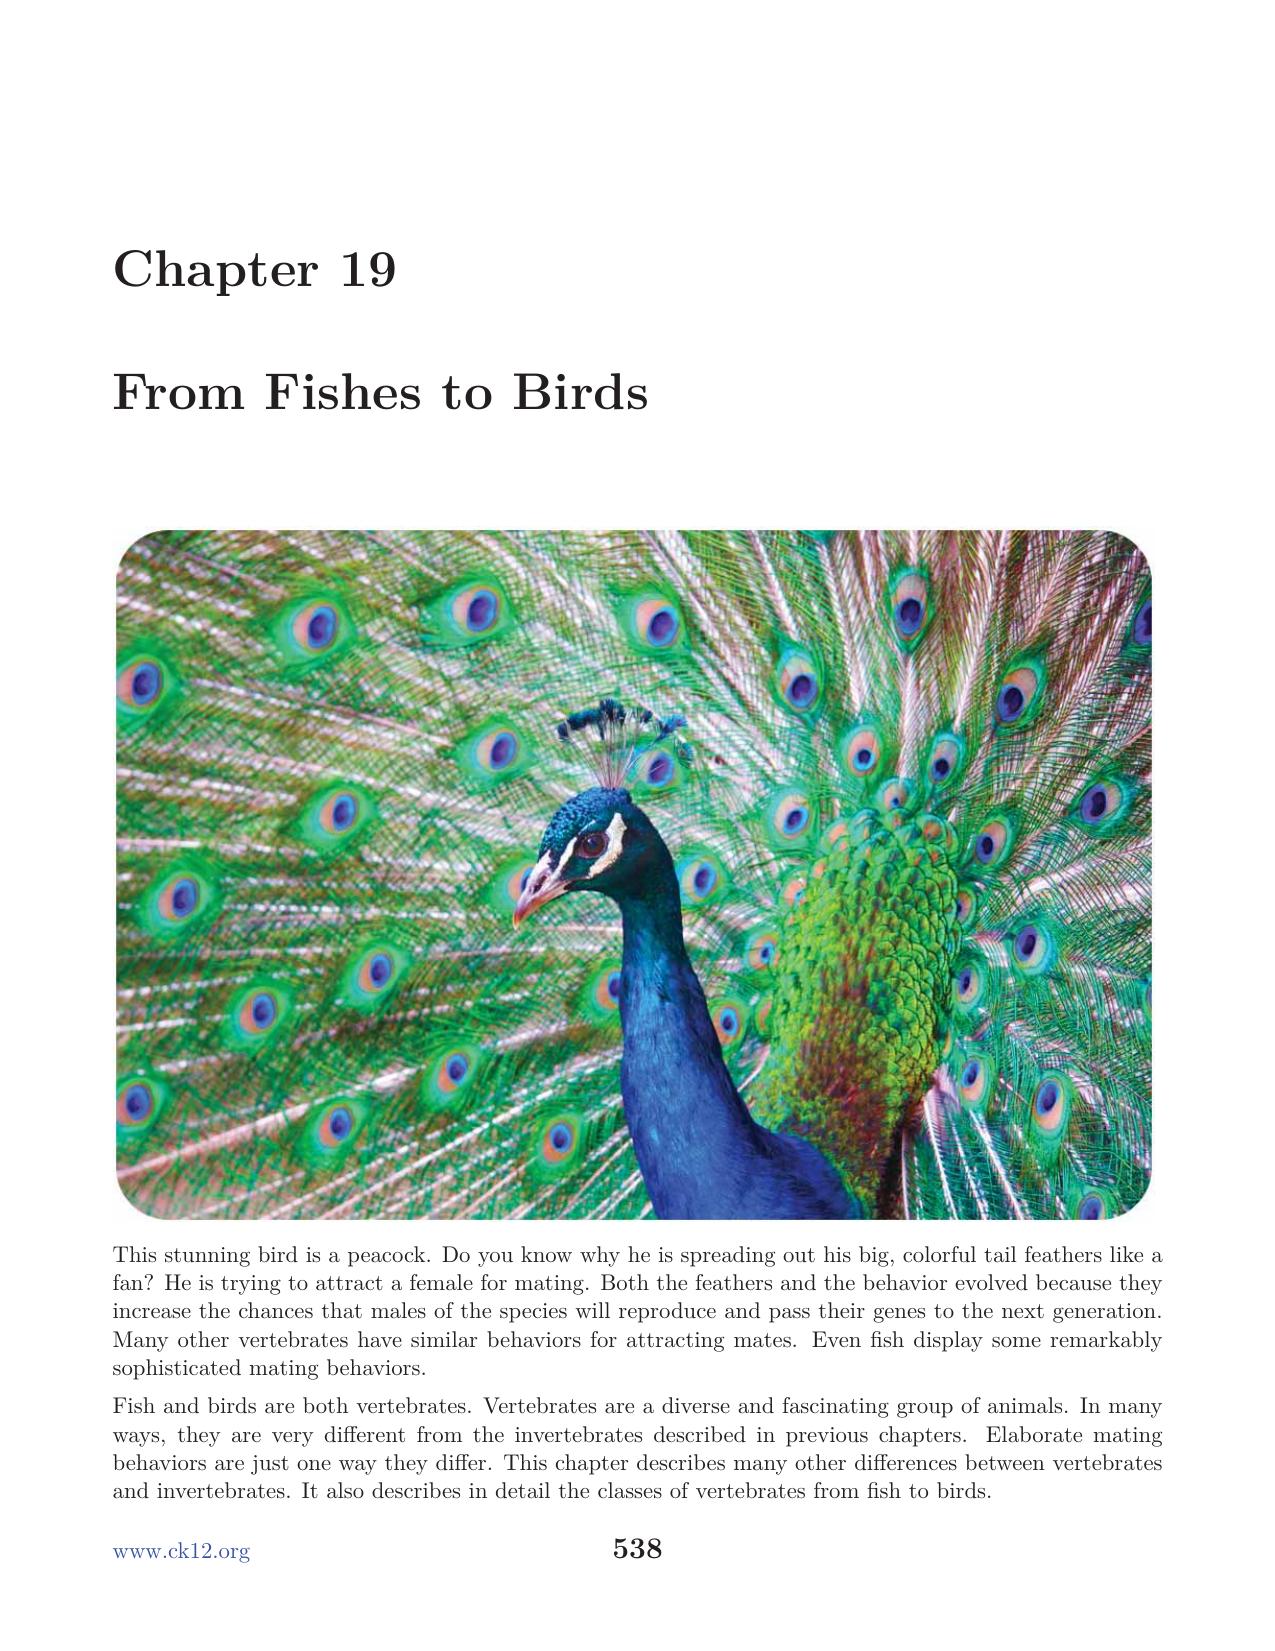 Biology Chapter19